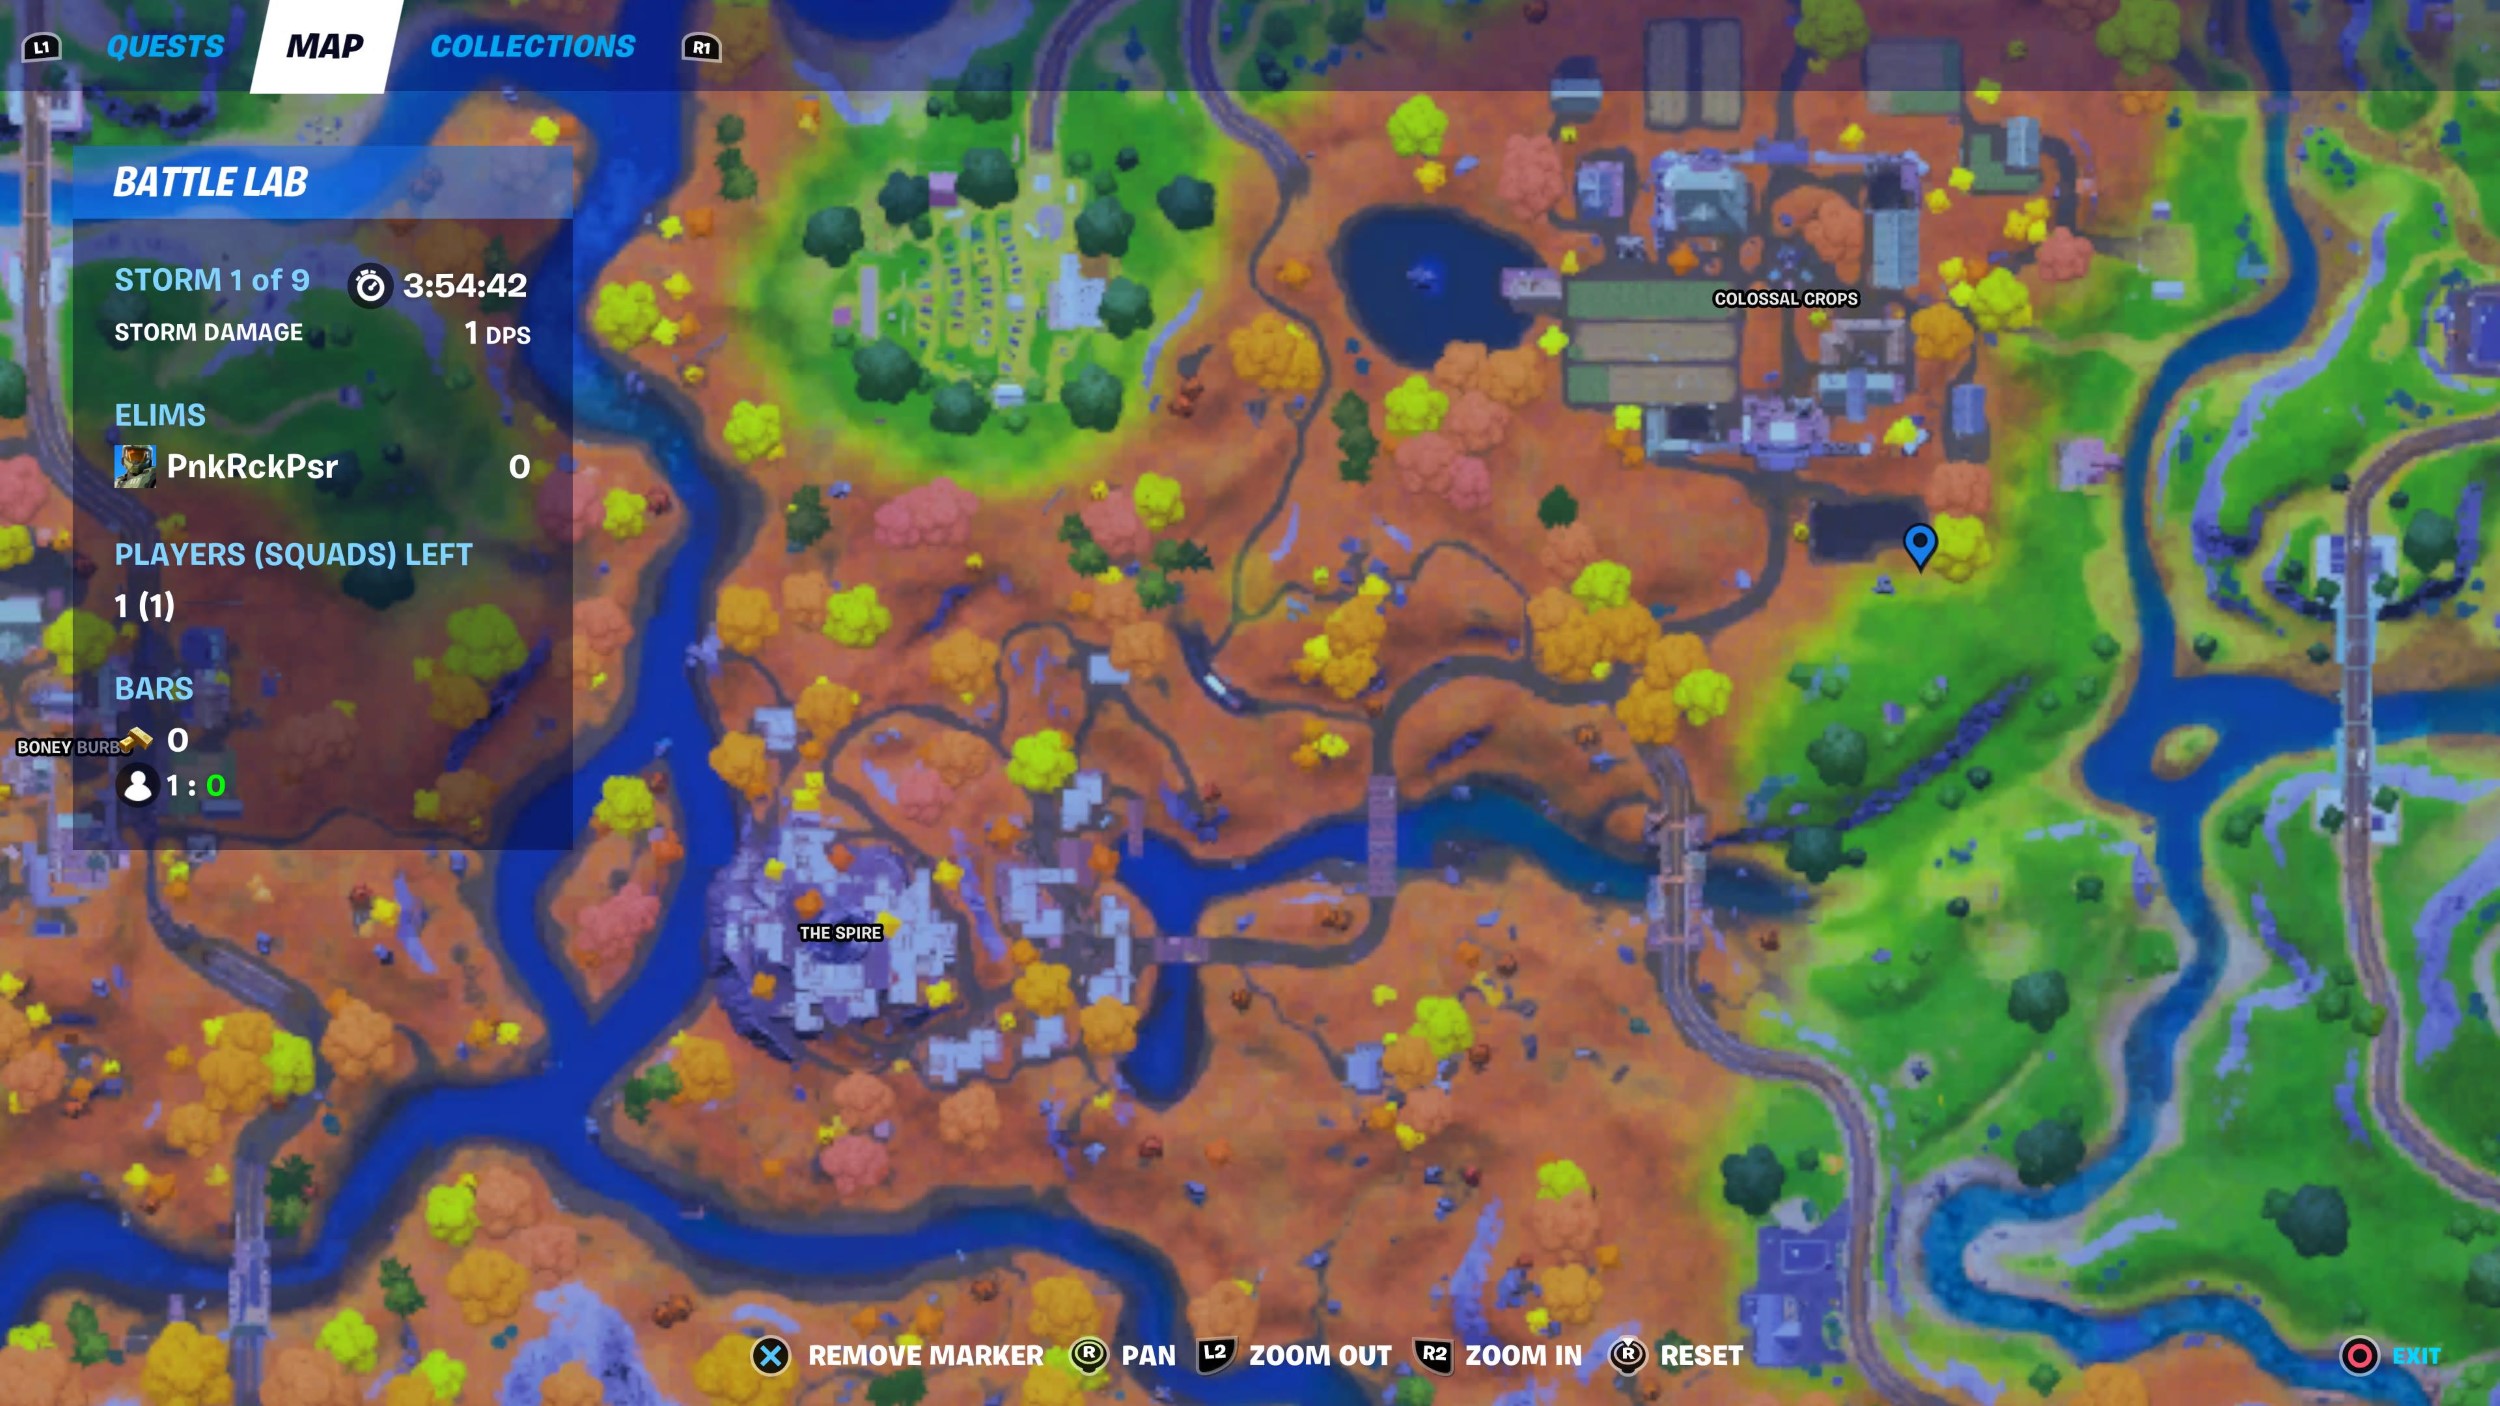 All Fortnite Chicken Locations Fortnite Chicken Locations And How To Hunt And Fly With Them For Week 3 Challenges